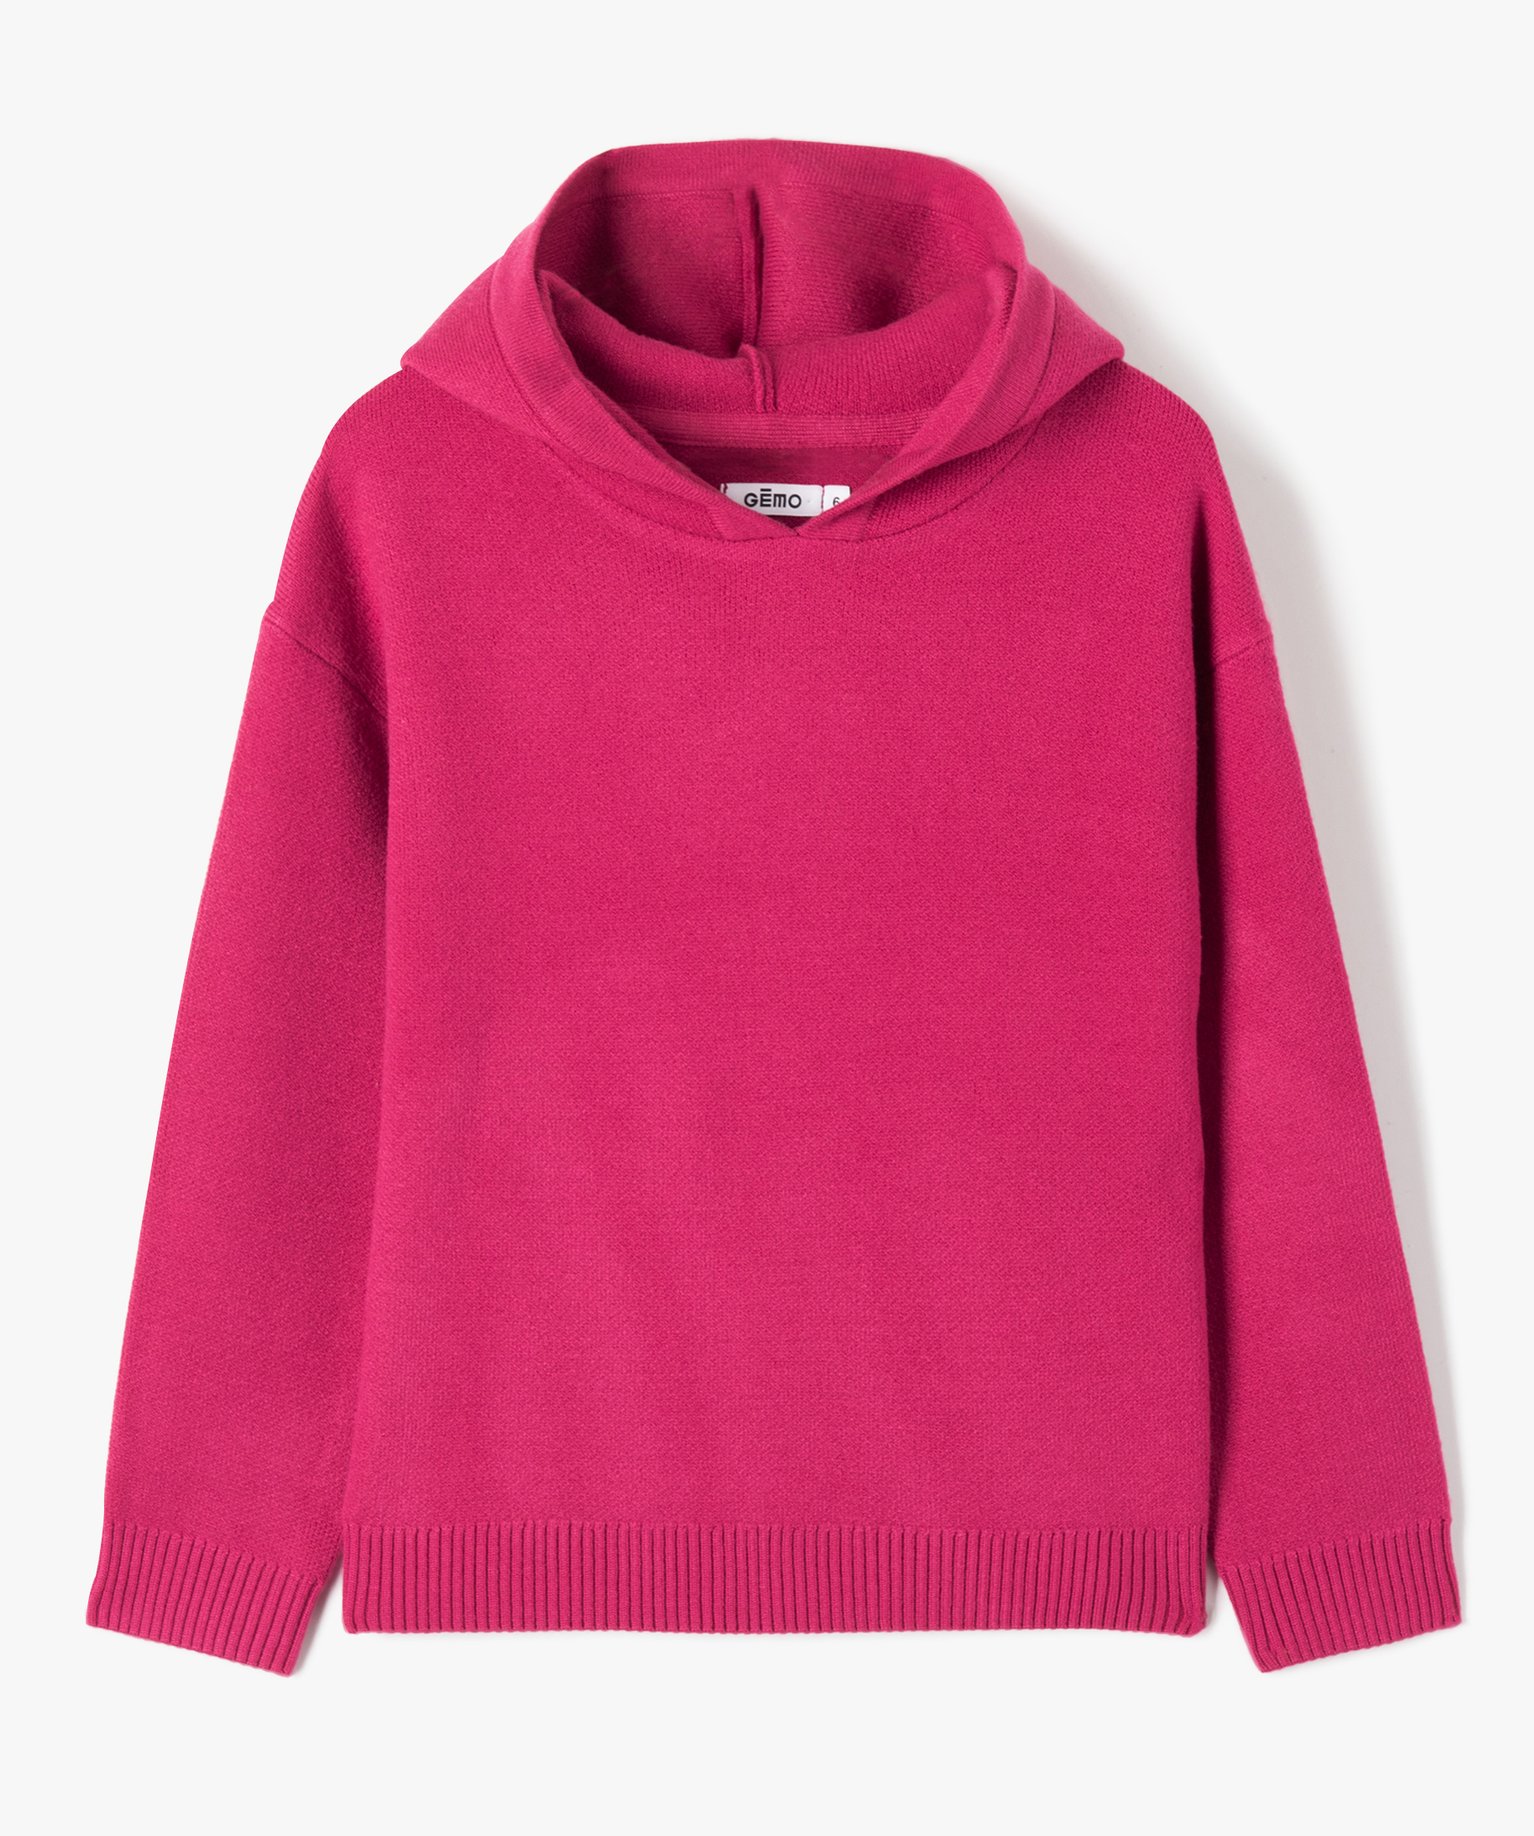 pull fille a capuche avec rayures pailletees rose pulls